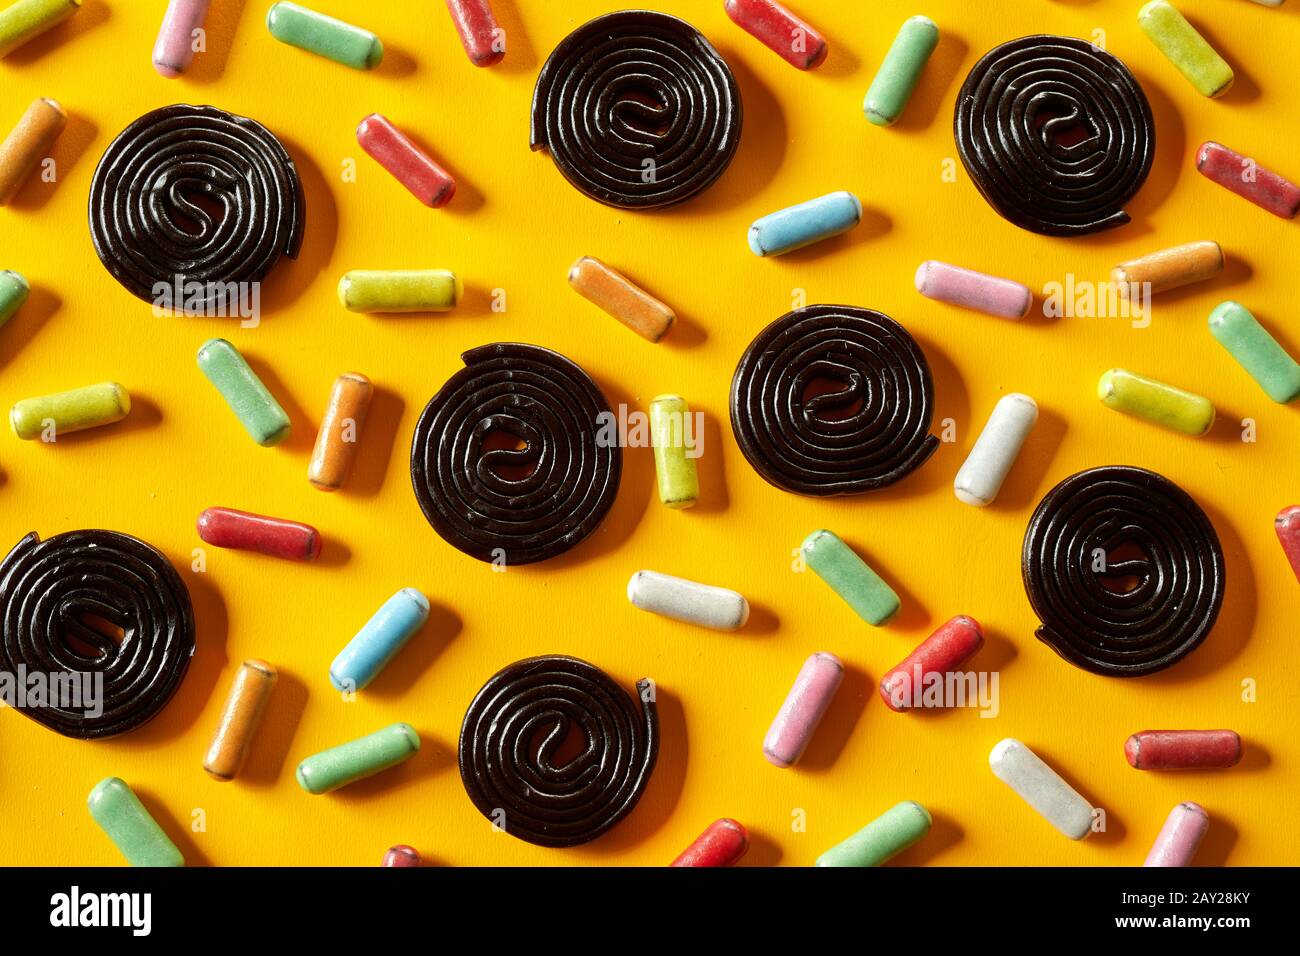 Liquorice spirals and sugar-coated candy arranged in a random pattern on an exotic yellow background in full frame view Stock Photo